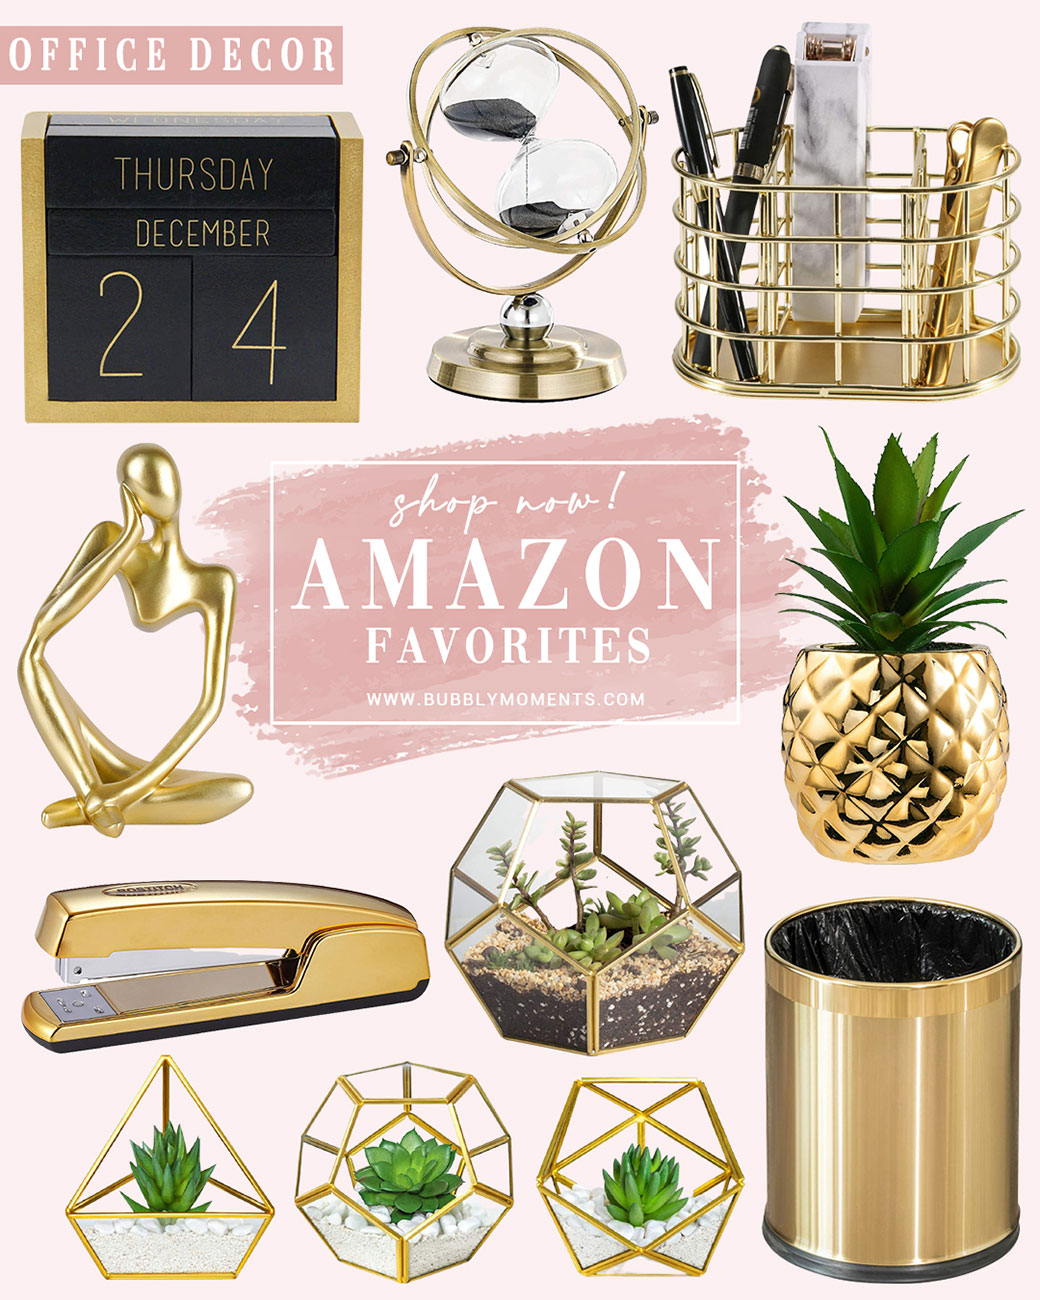 The Best Amazon Office Decor to Slay Your Home Office Setup